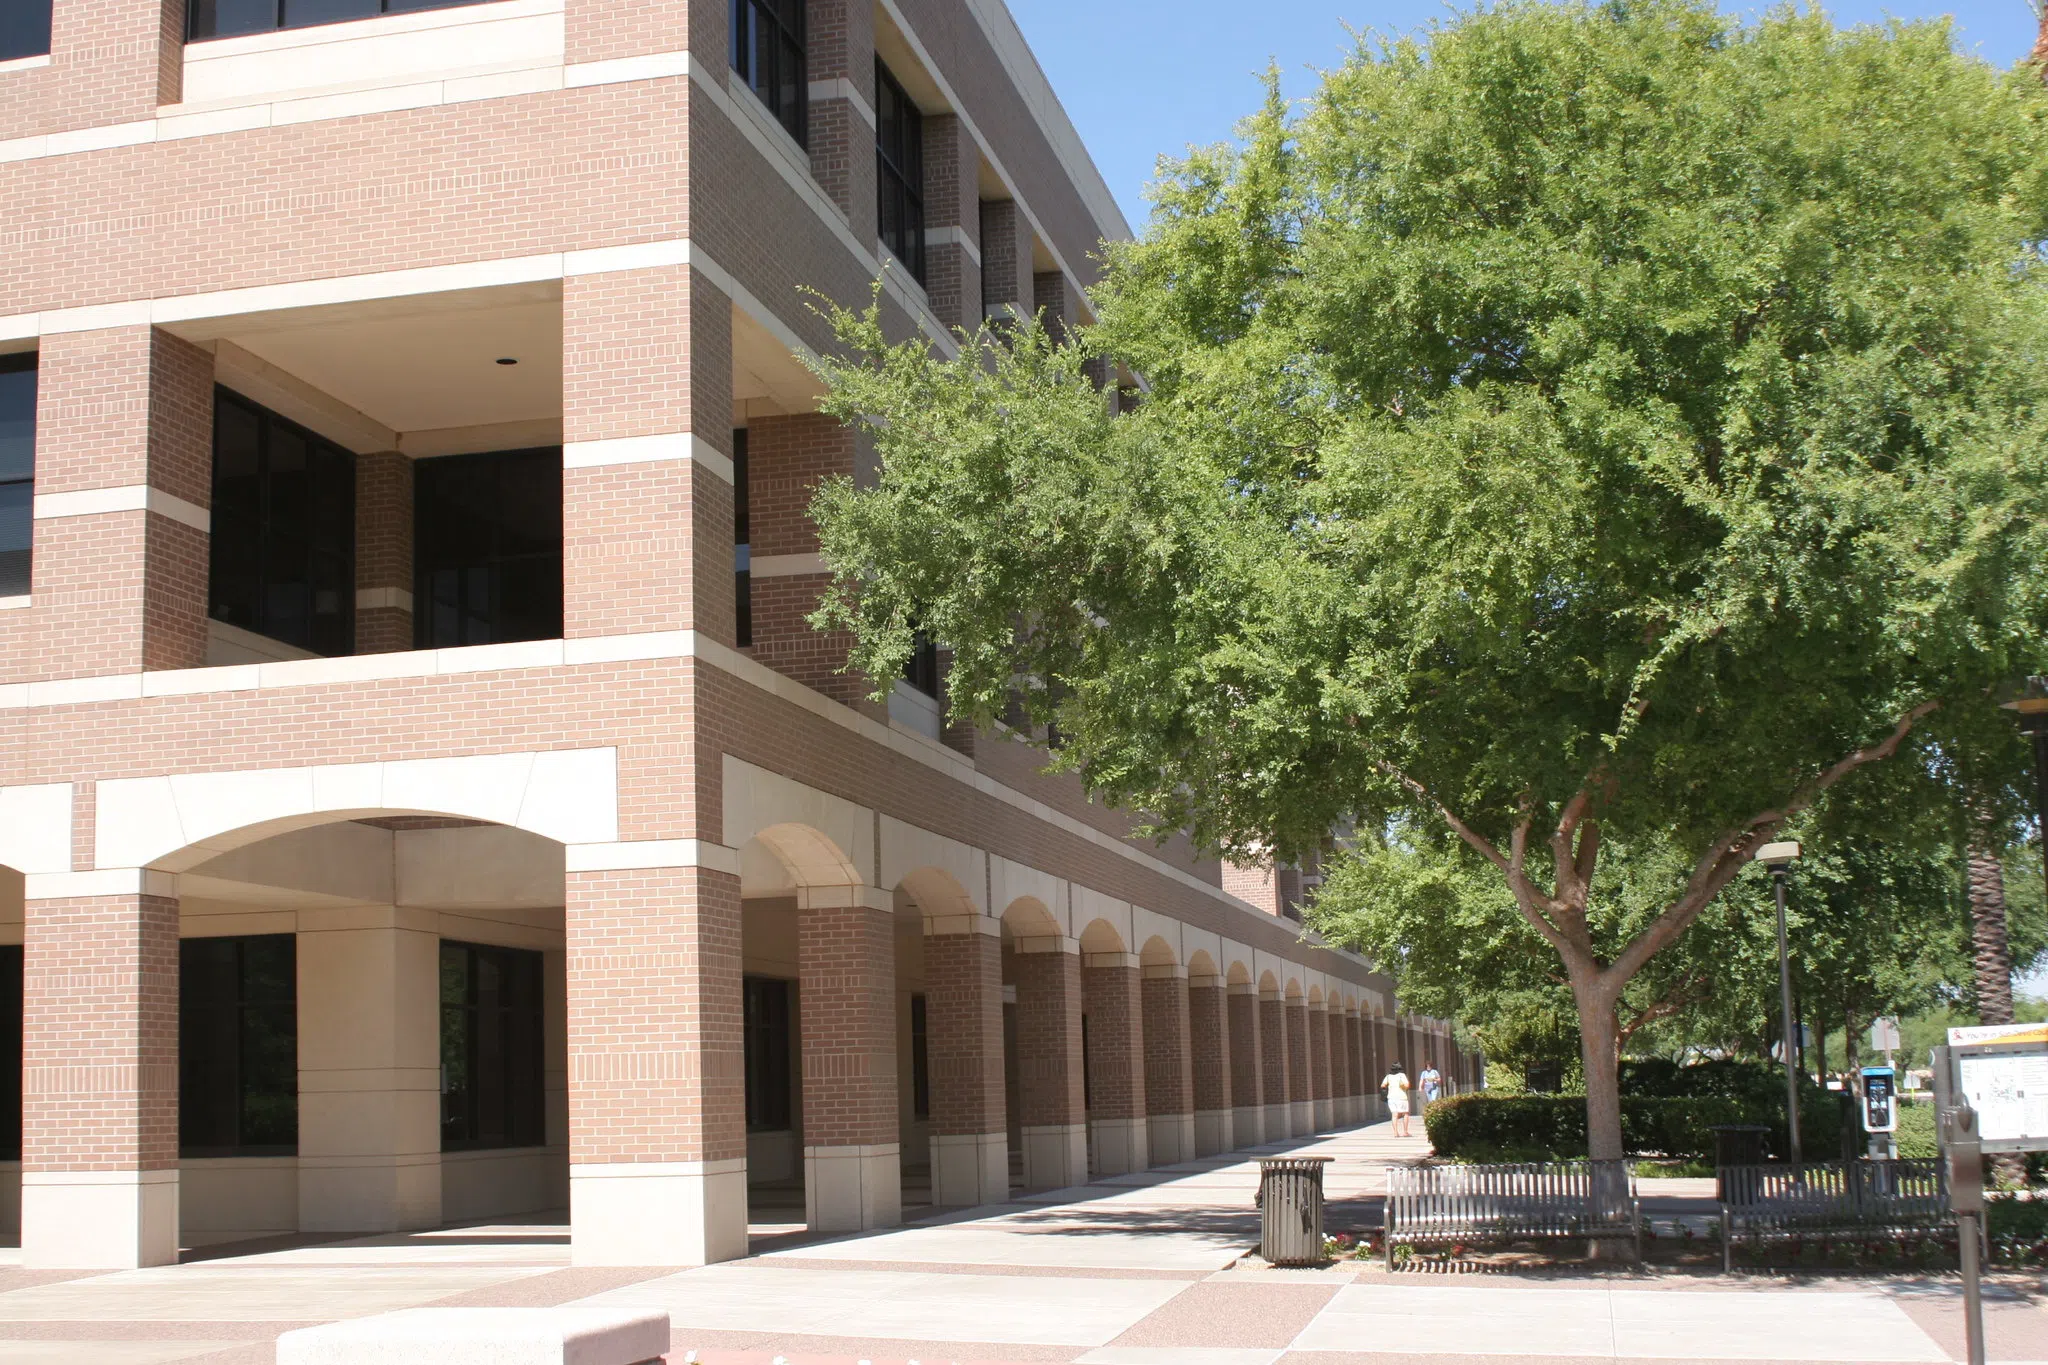 Exterior covered walkway along side of University Center Building.